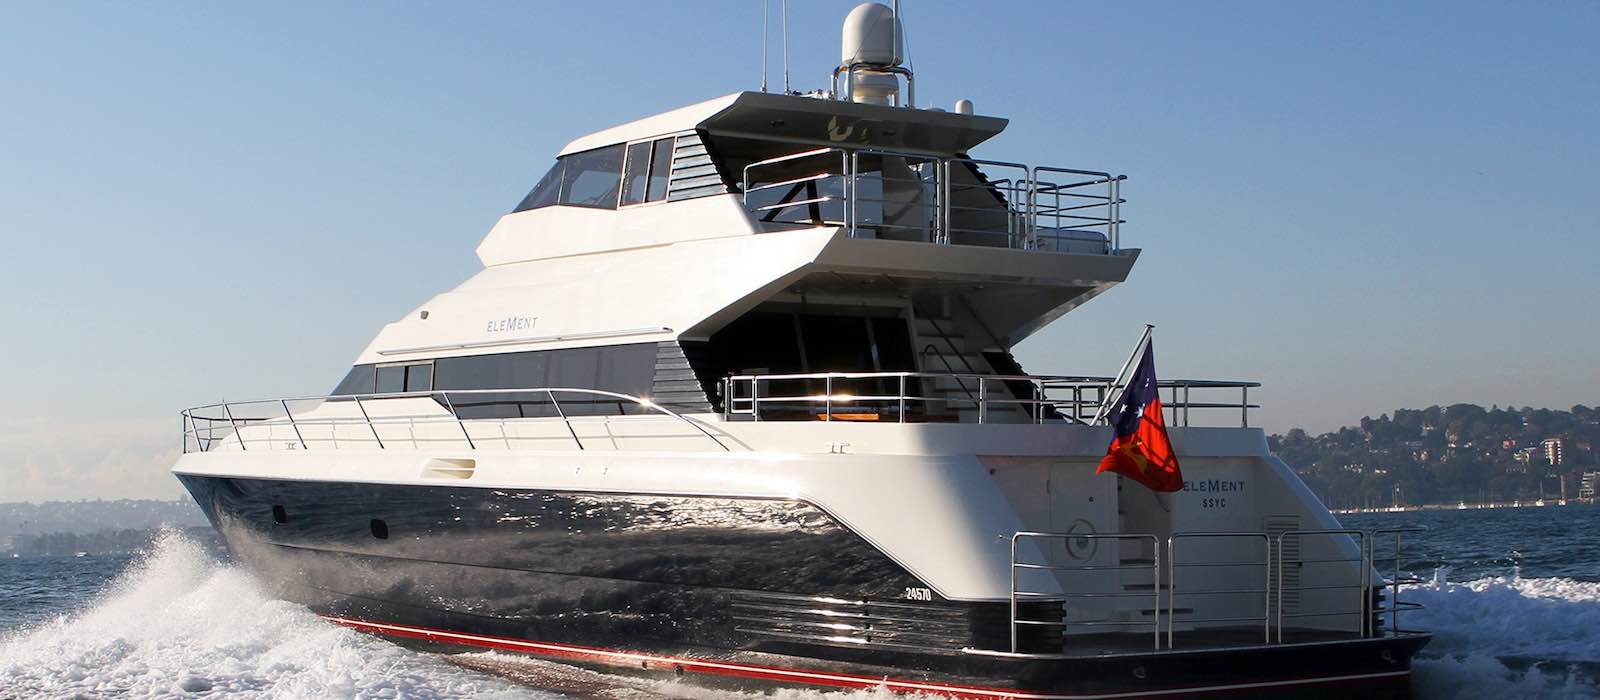 Stern view of luxury charter yacht Element